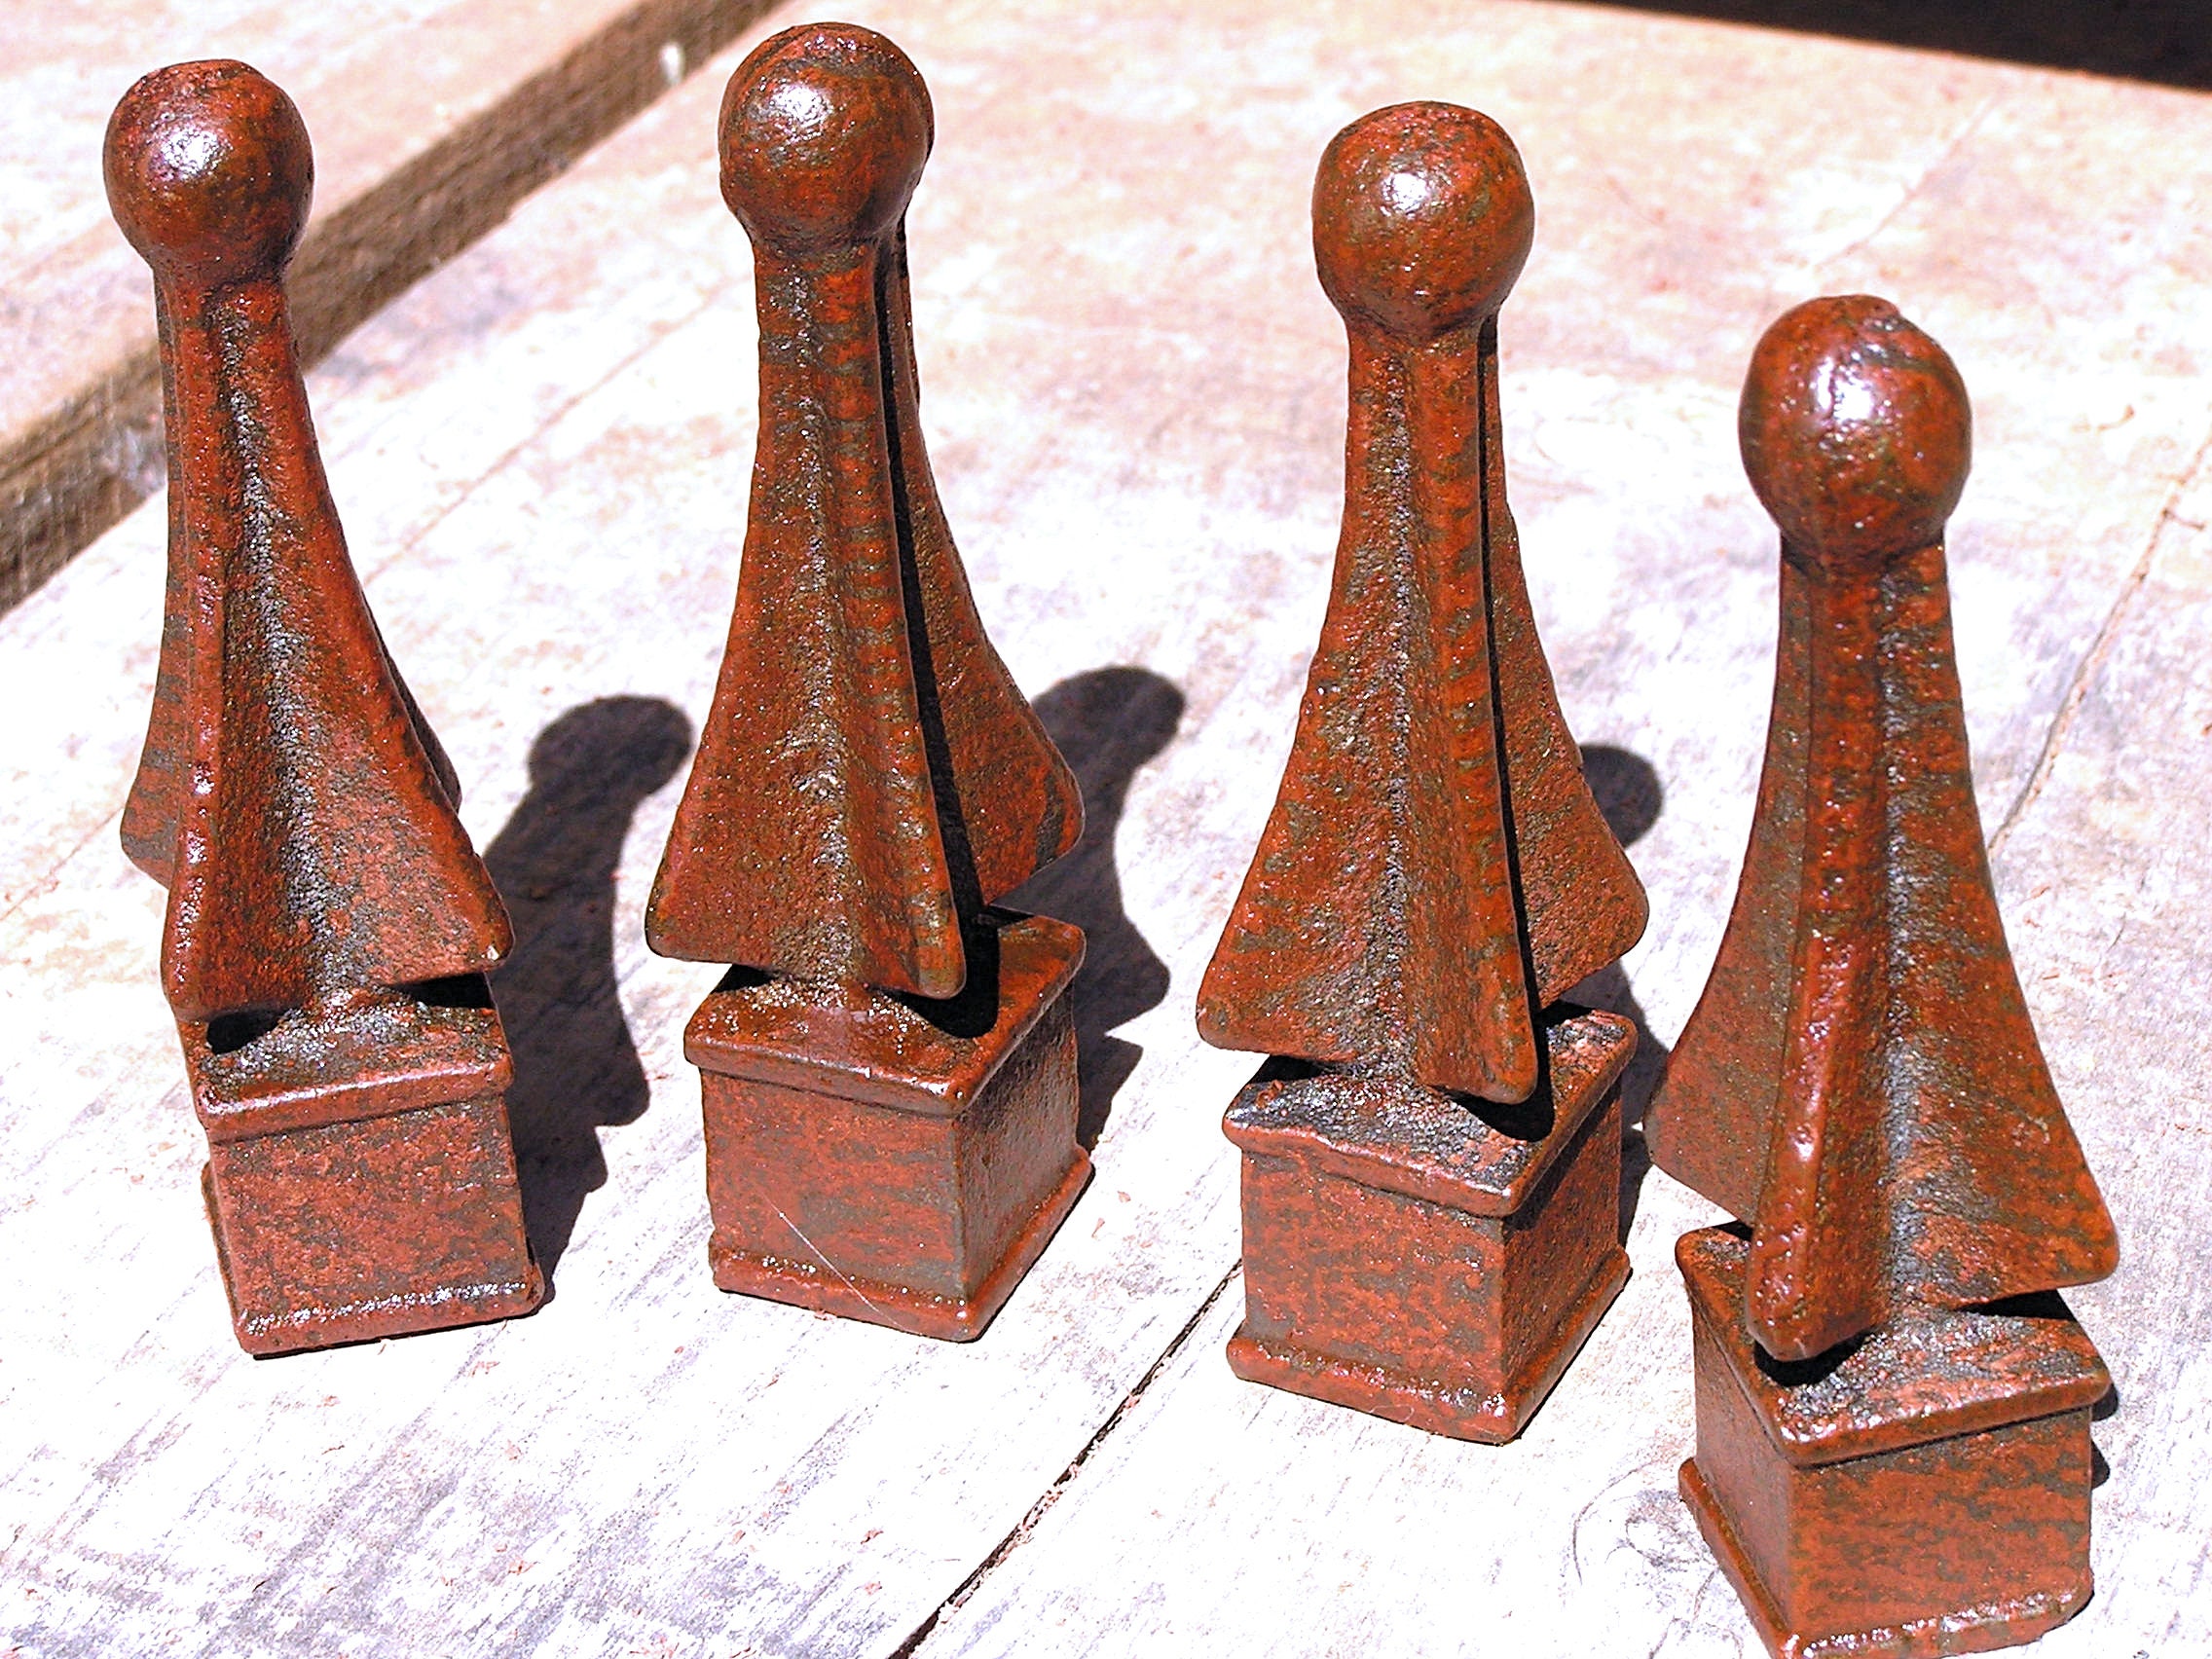 4 Vintage Unfinished Wood Finials With Screw Base 3 3/4 Unpainted New